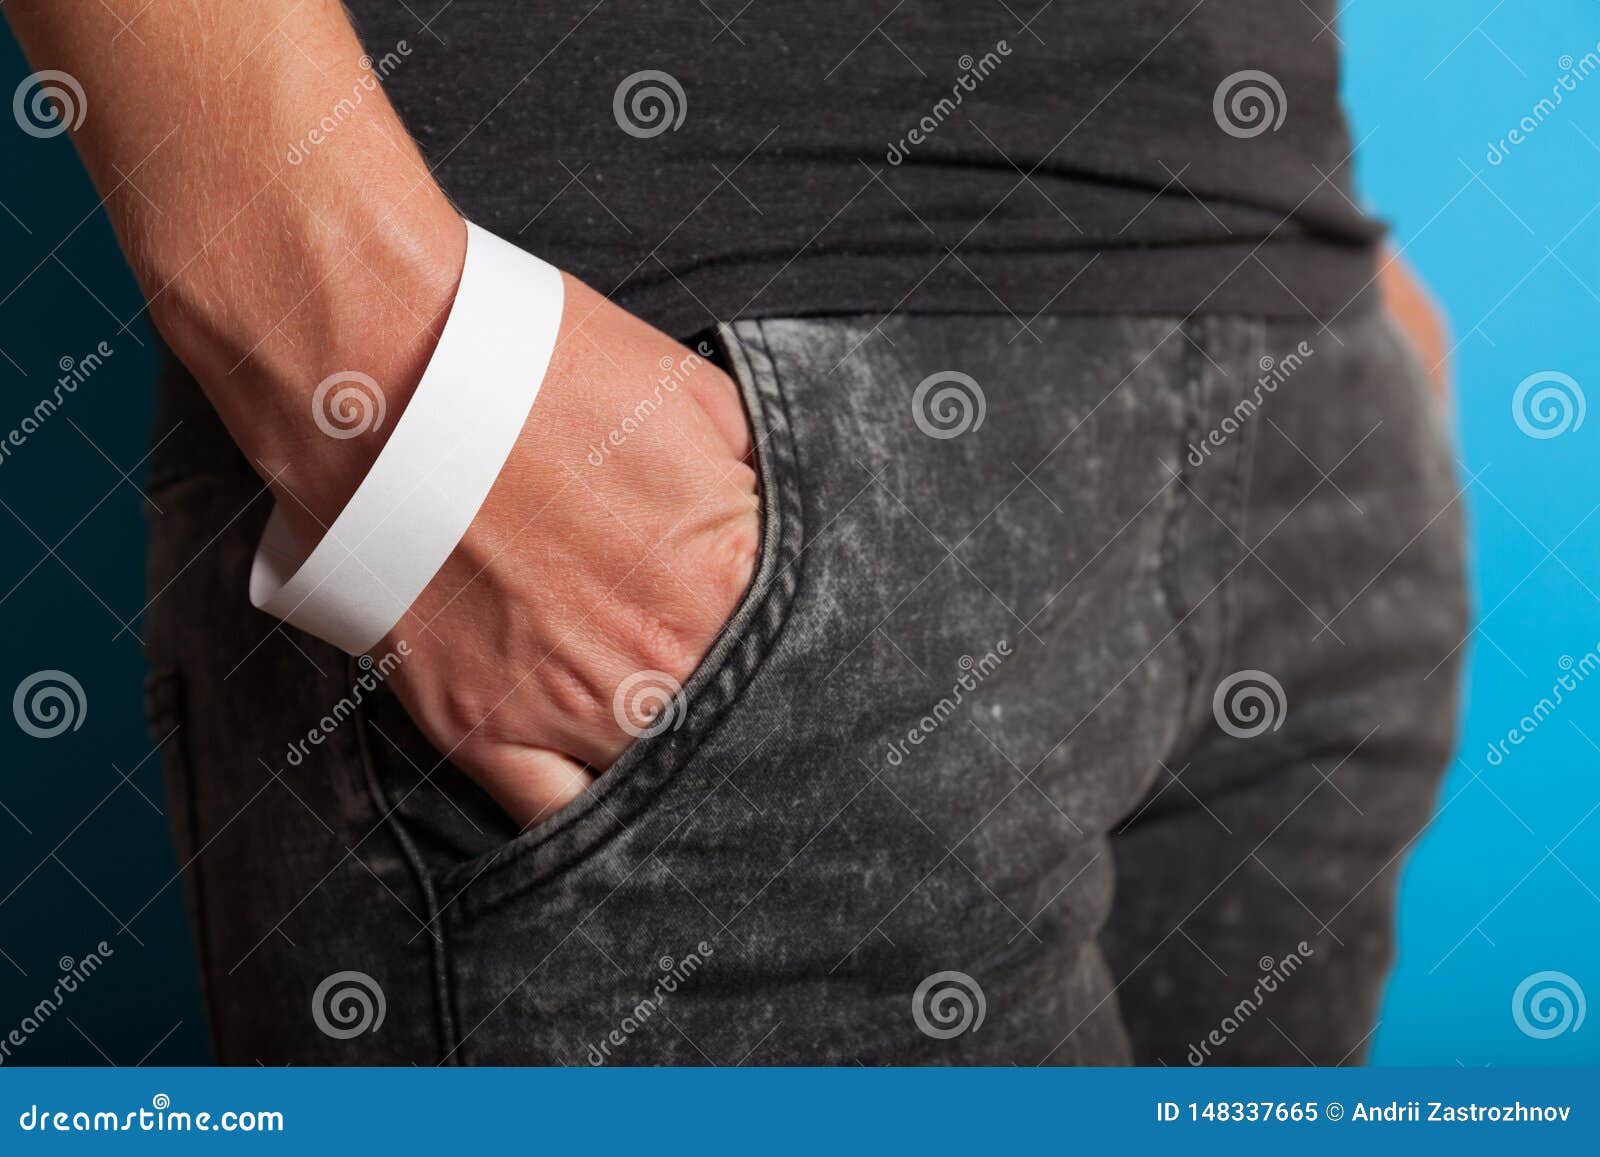 Download Paper Wristband Mockup, Event Bracelet On Hand. Empty ...